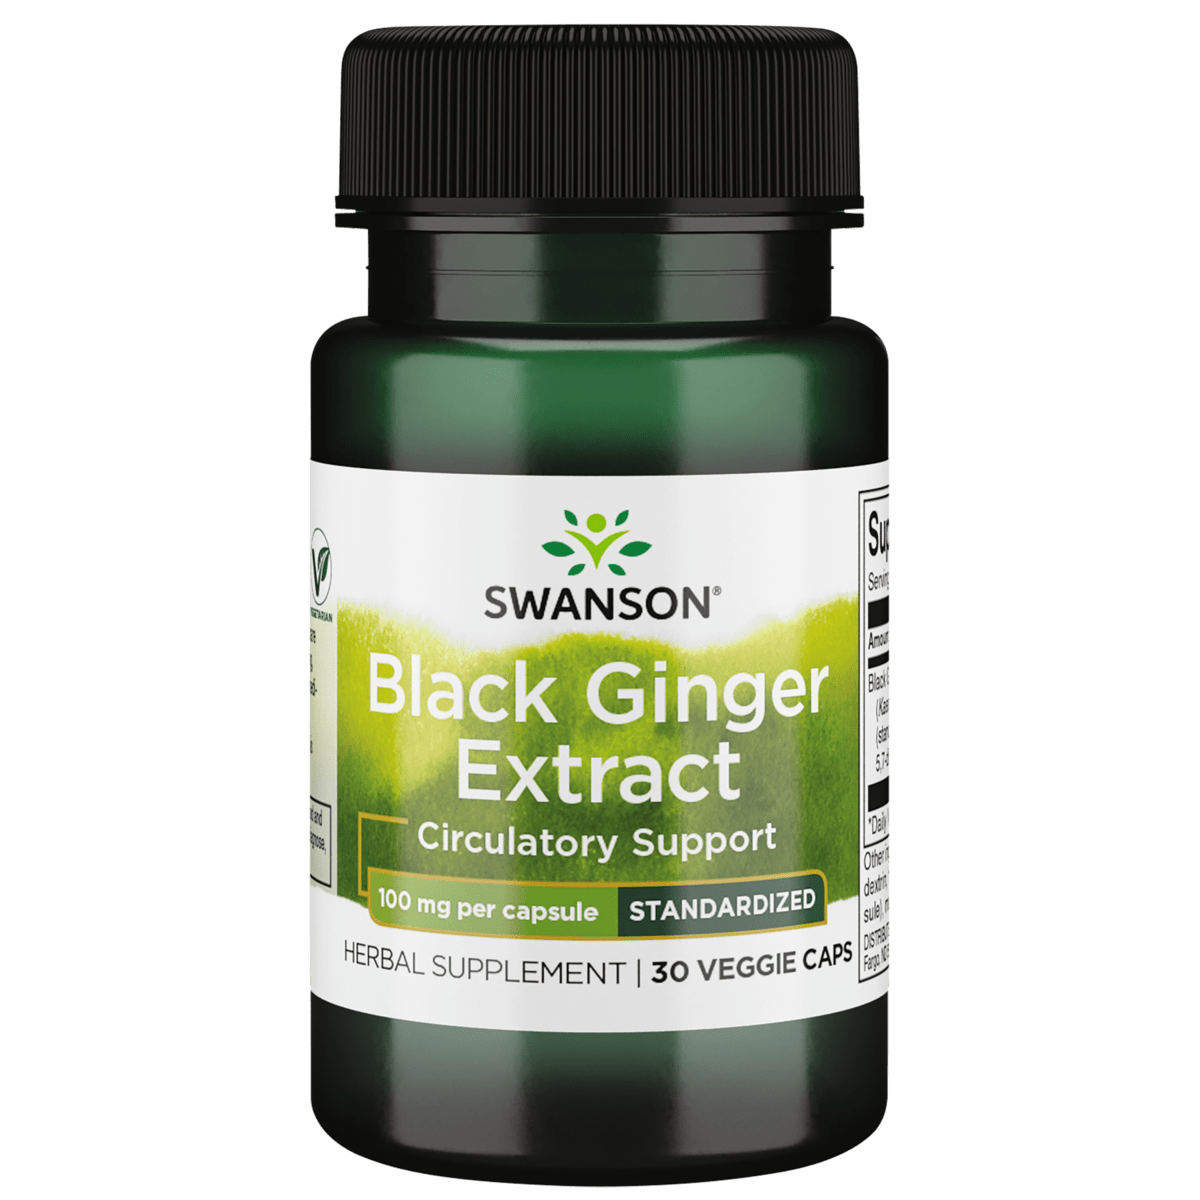 Swanson Black Ginger Extract - Standardized 100mg | healthy.co.nz